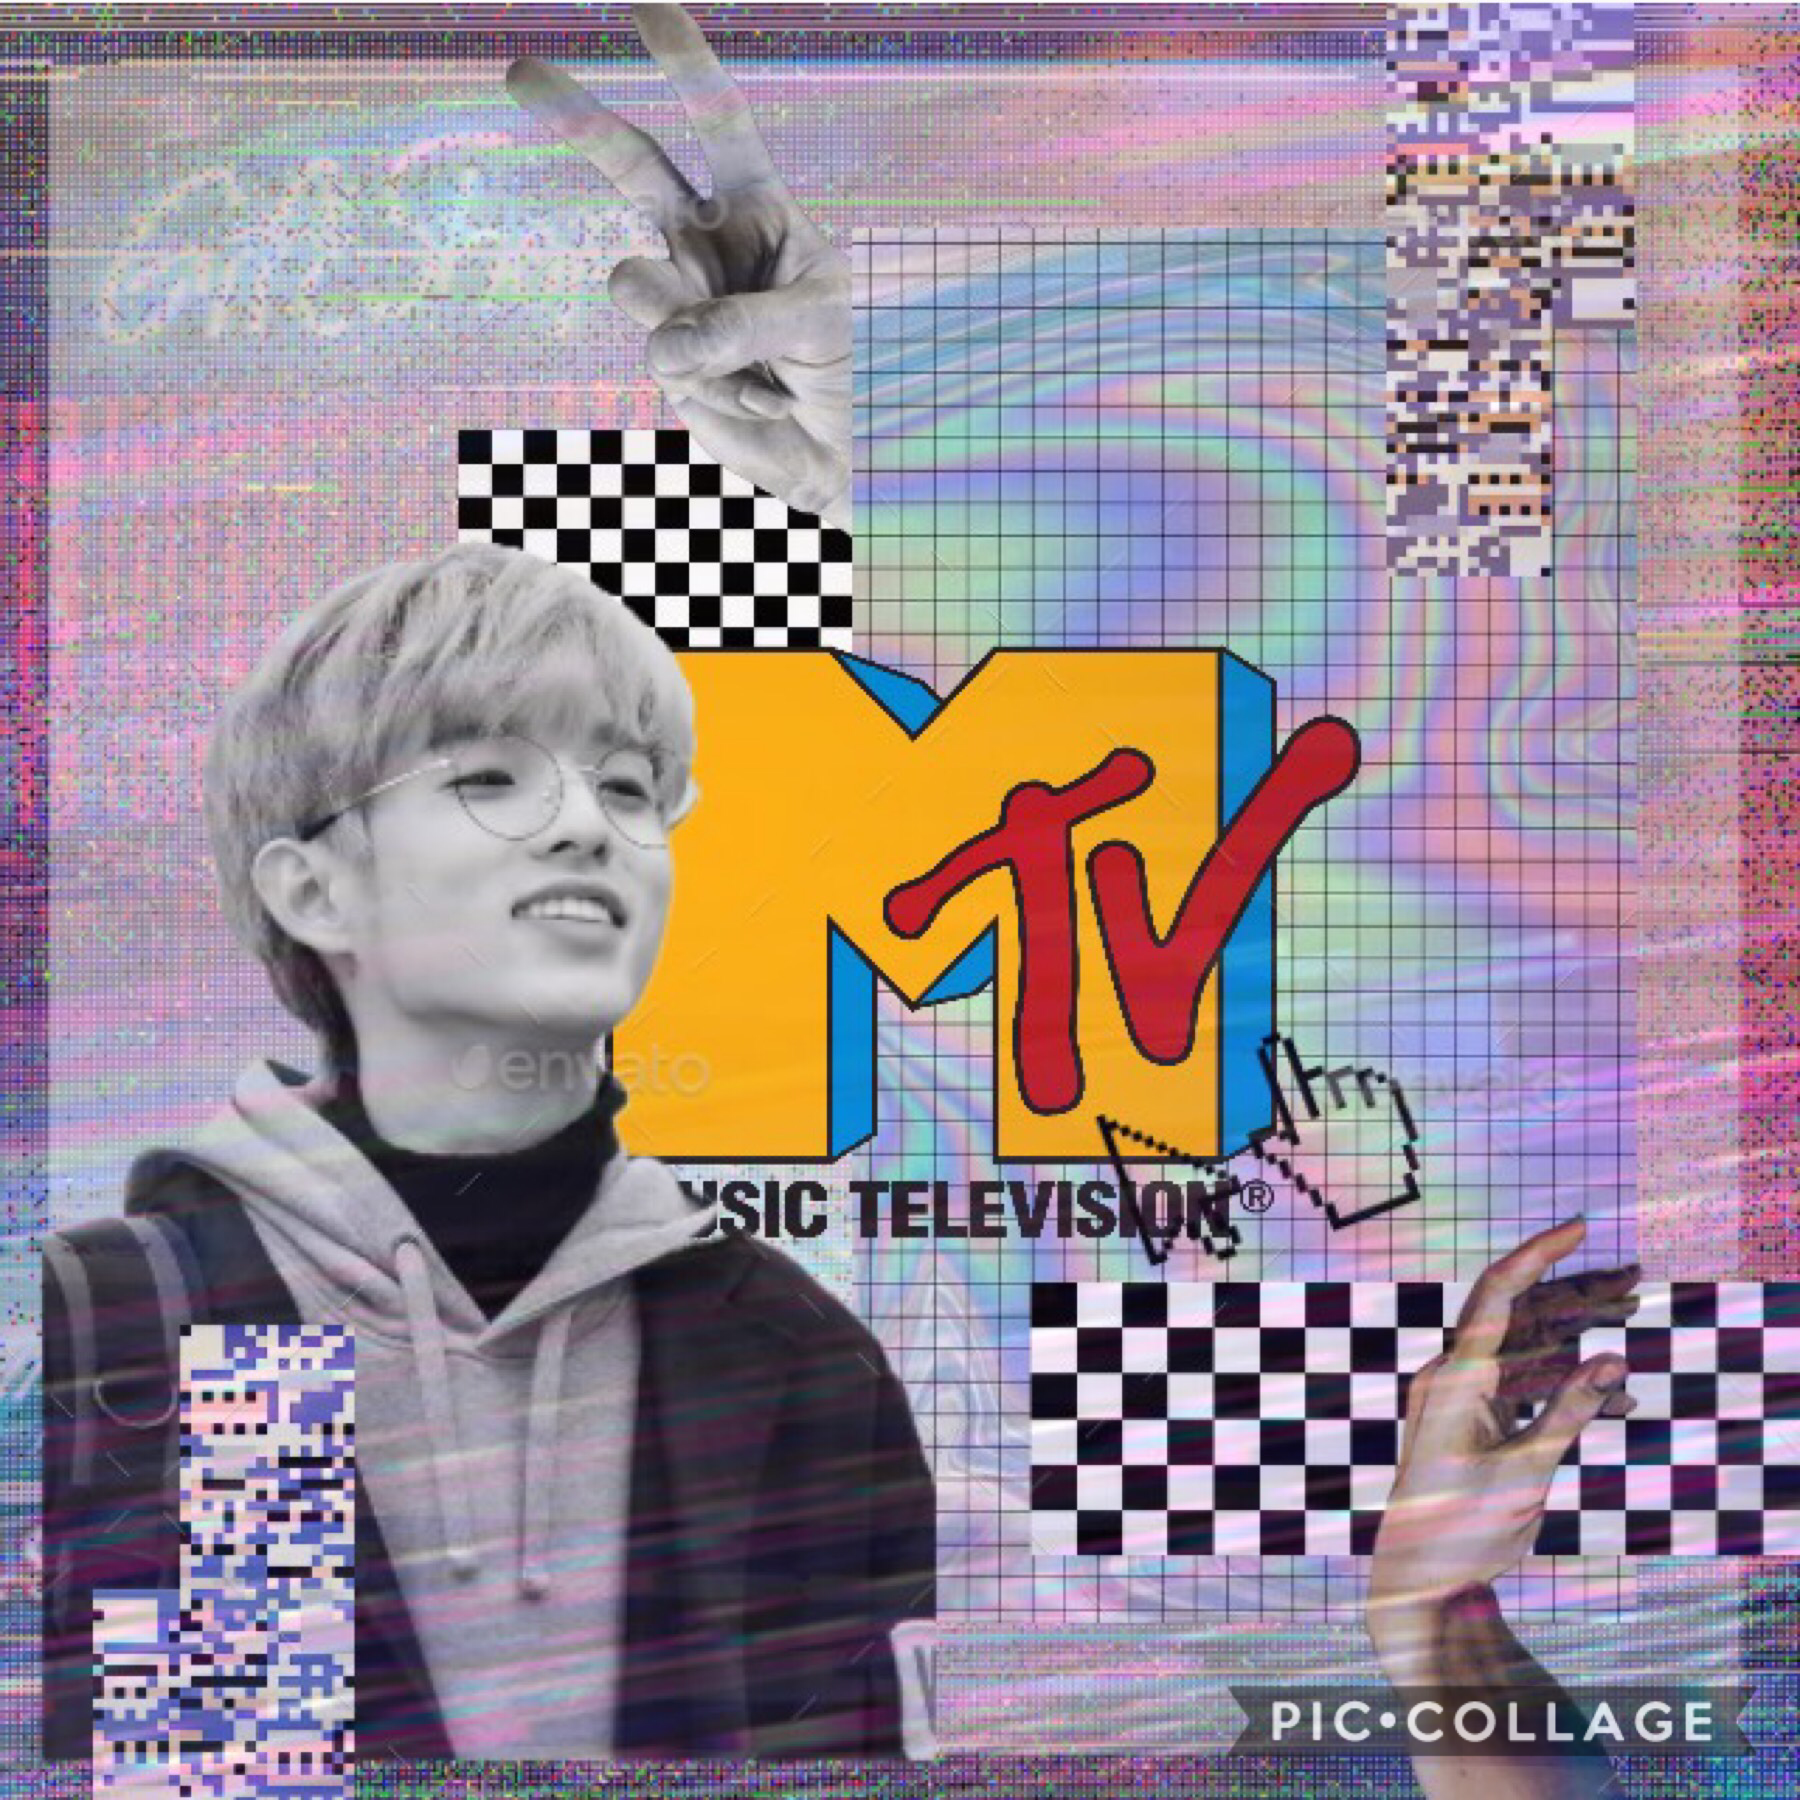 My kpop games entry for Haru. I guess I just really like the 90s aesthetic and the tv glitches and stuff... ♥︎